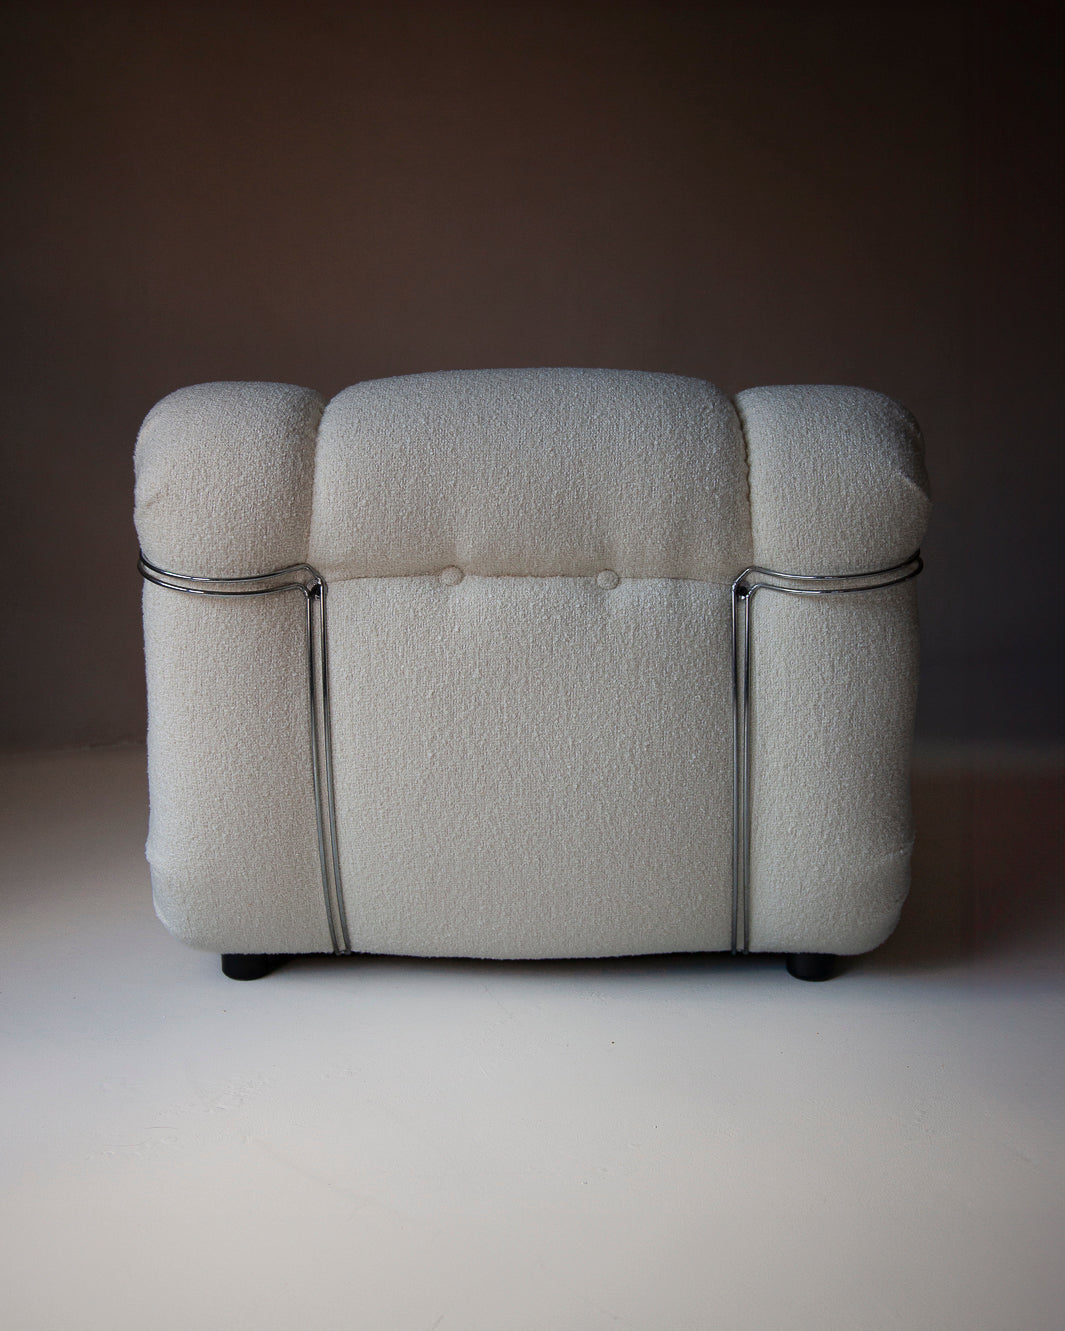 Fauteuil Velasques by Rino Maturi dating from the years 70